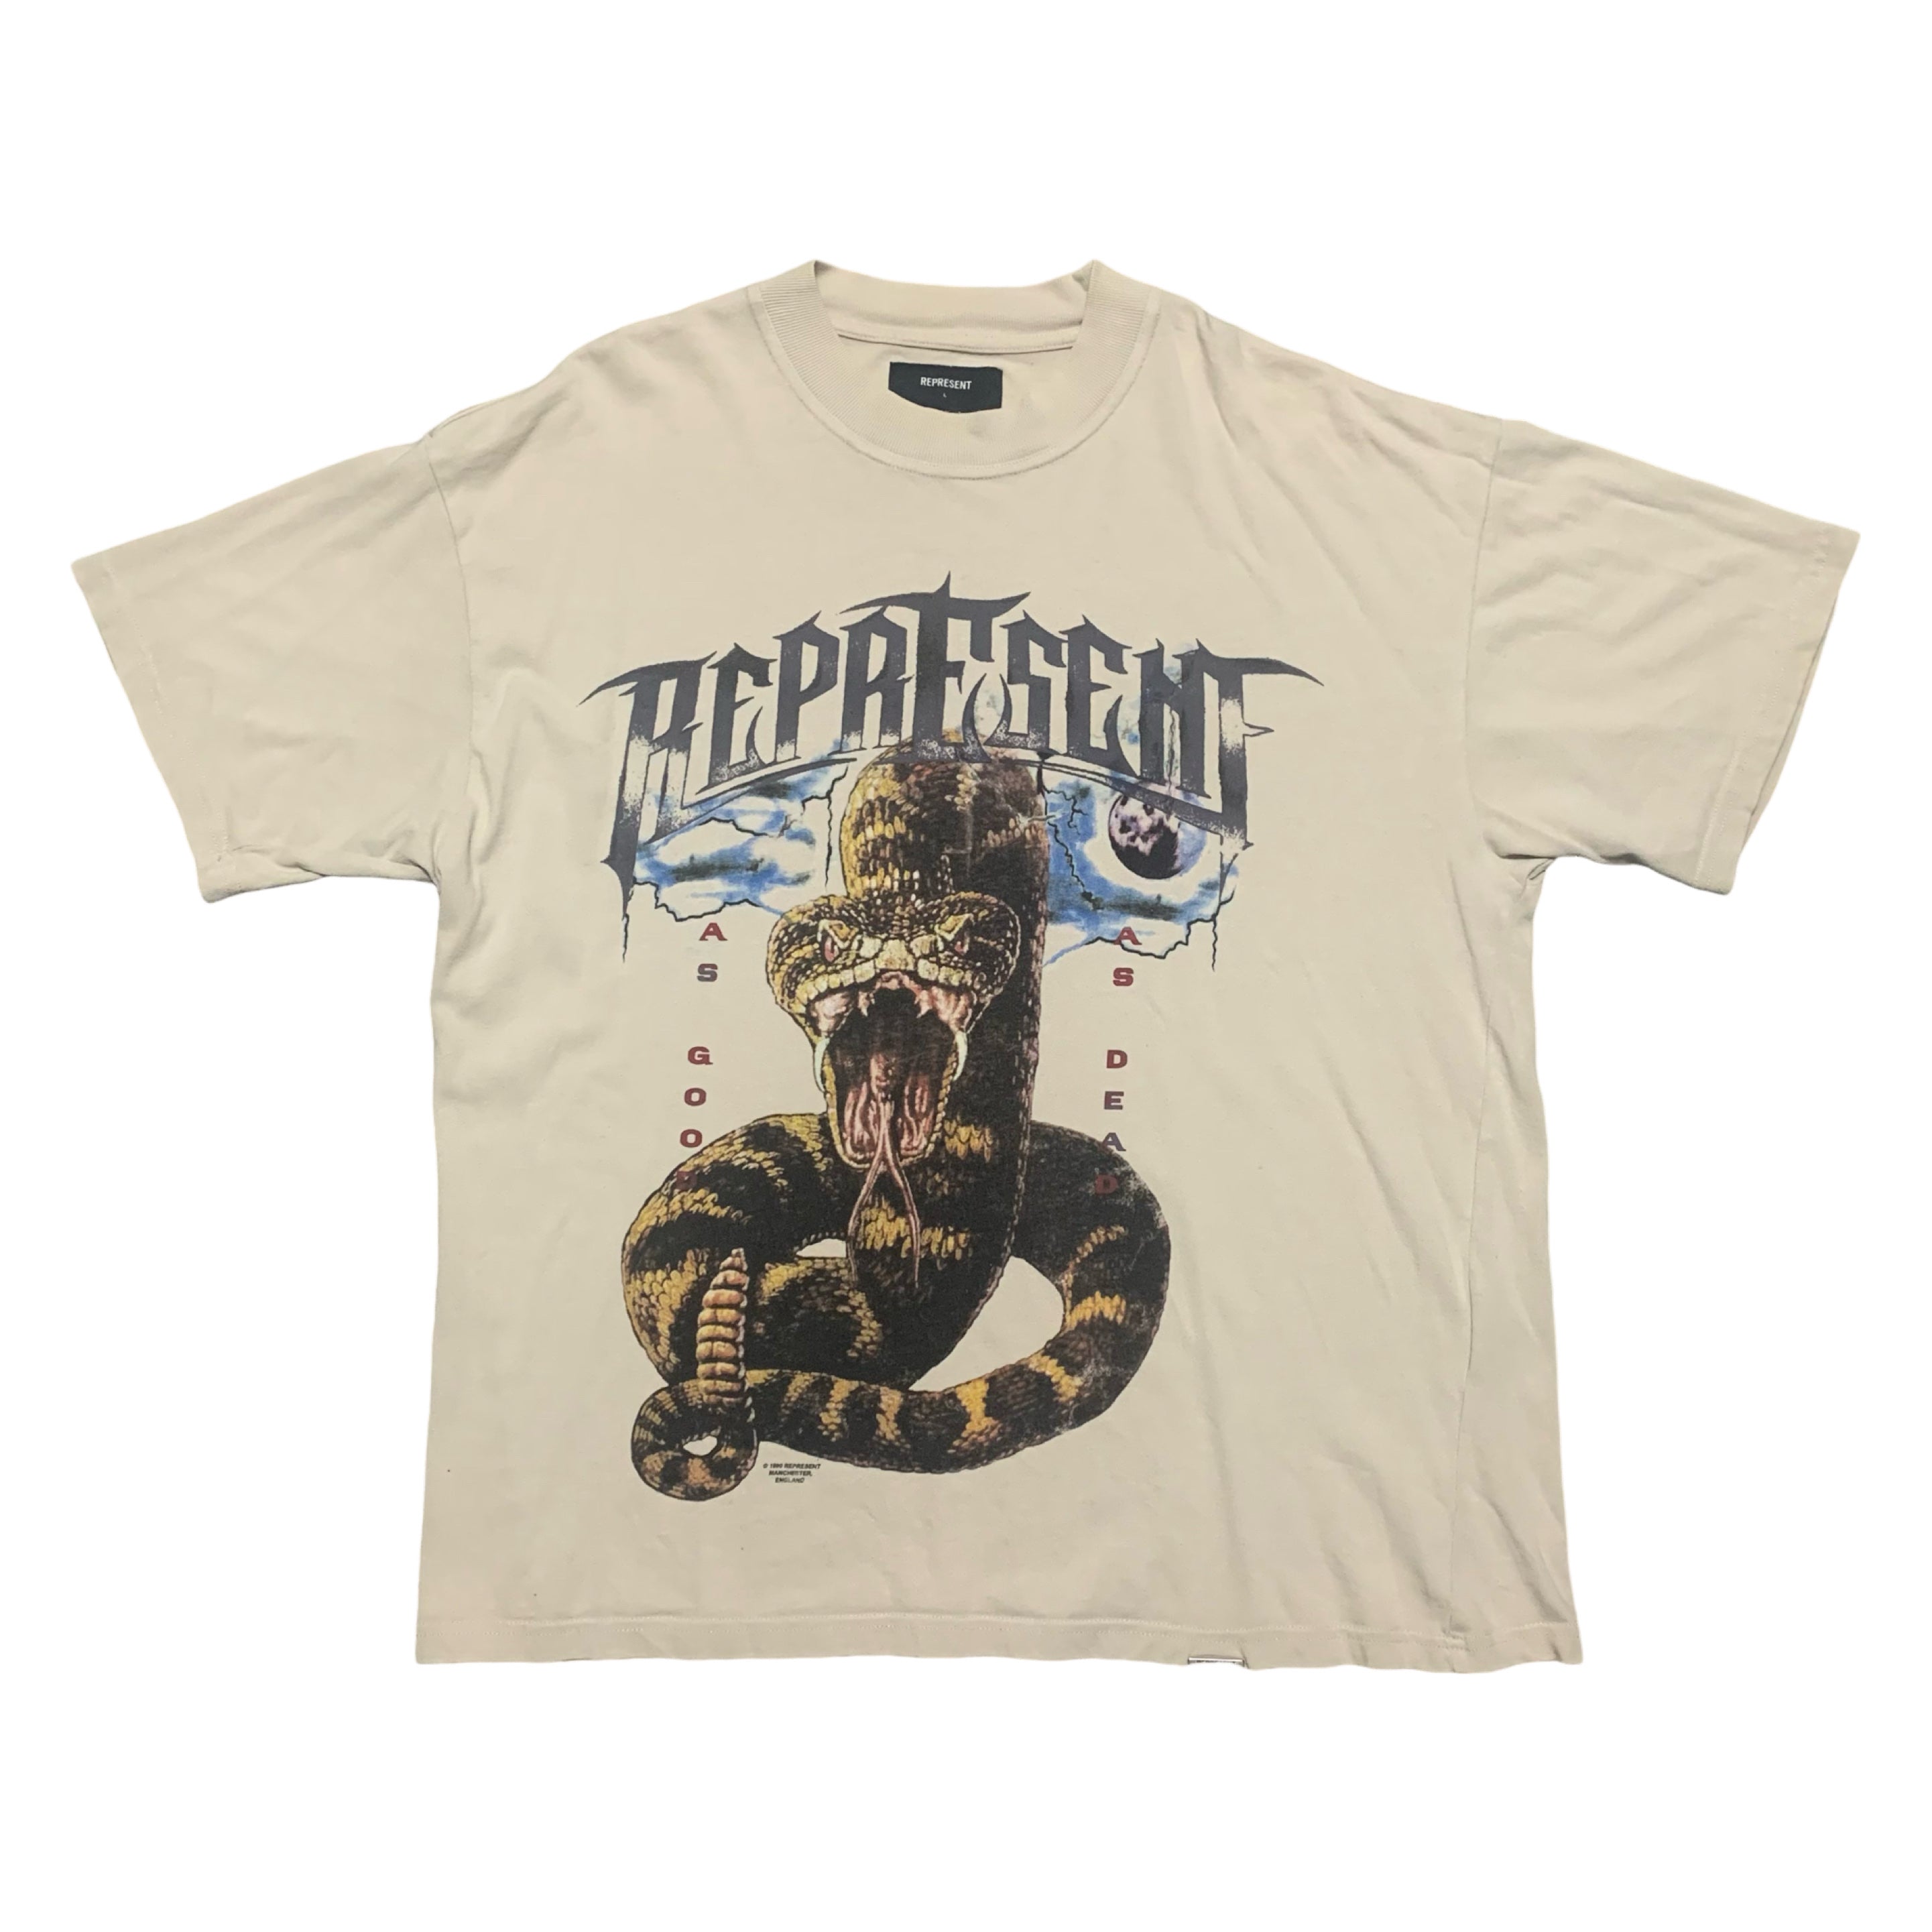 Represent Large As Good As Dead Vintage White Tee